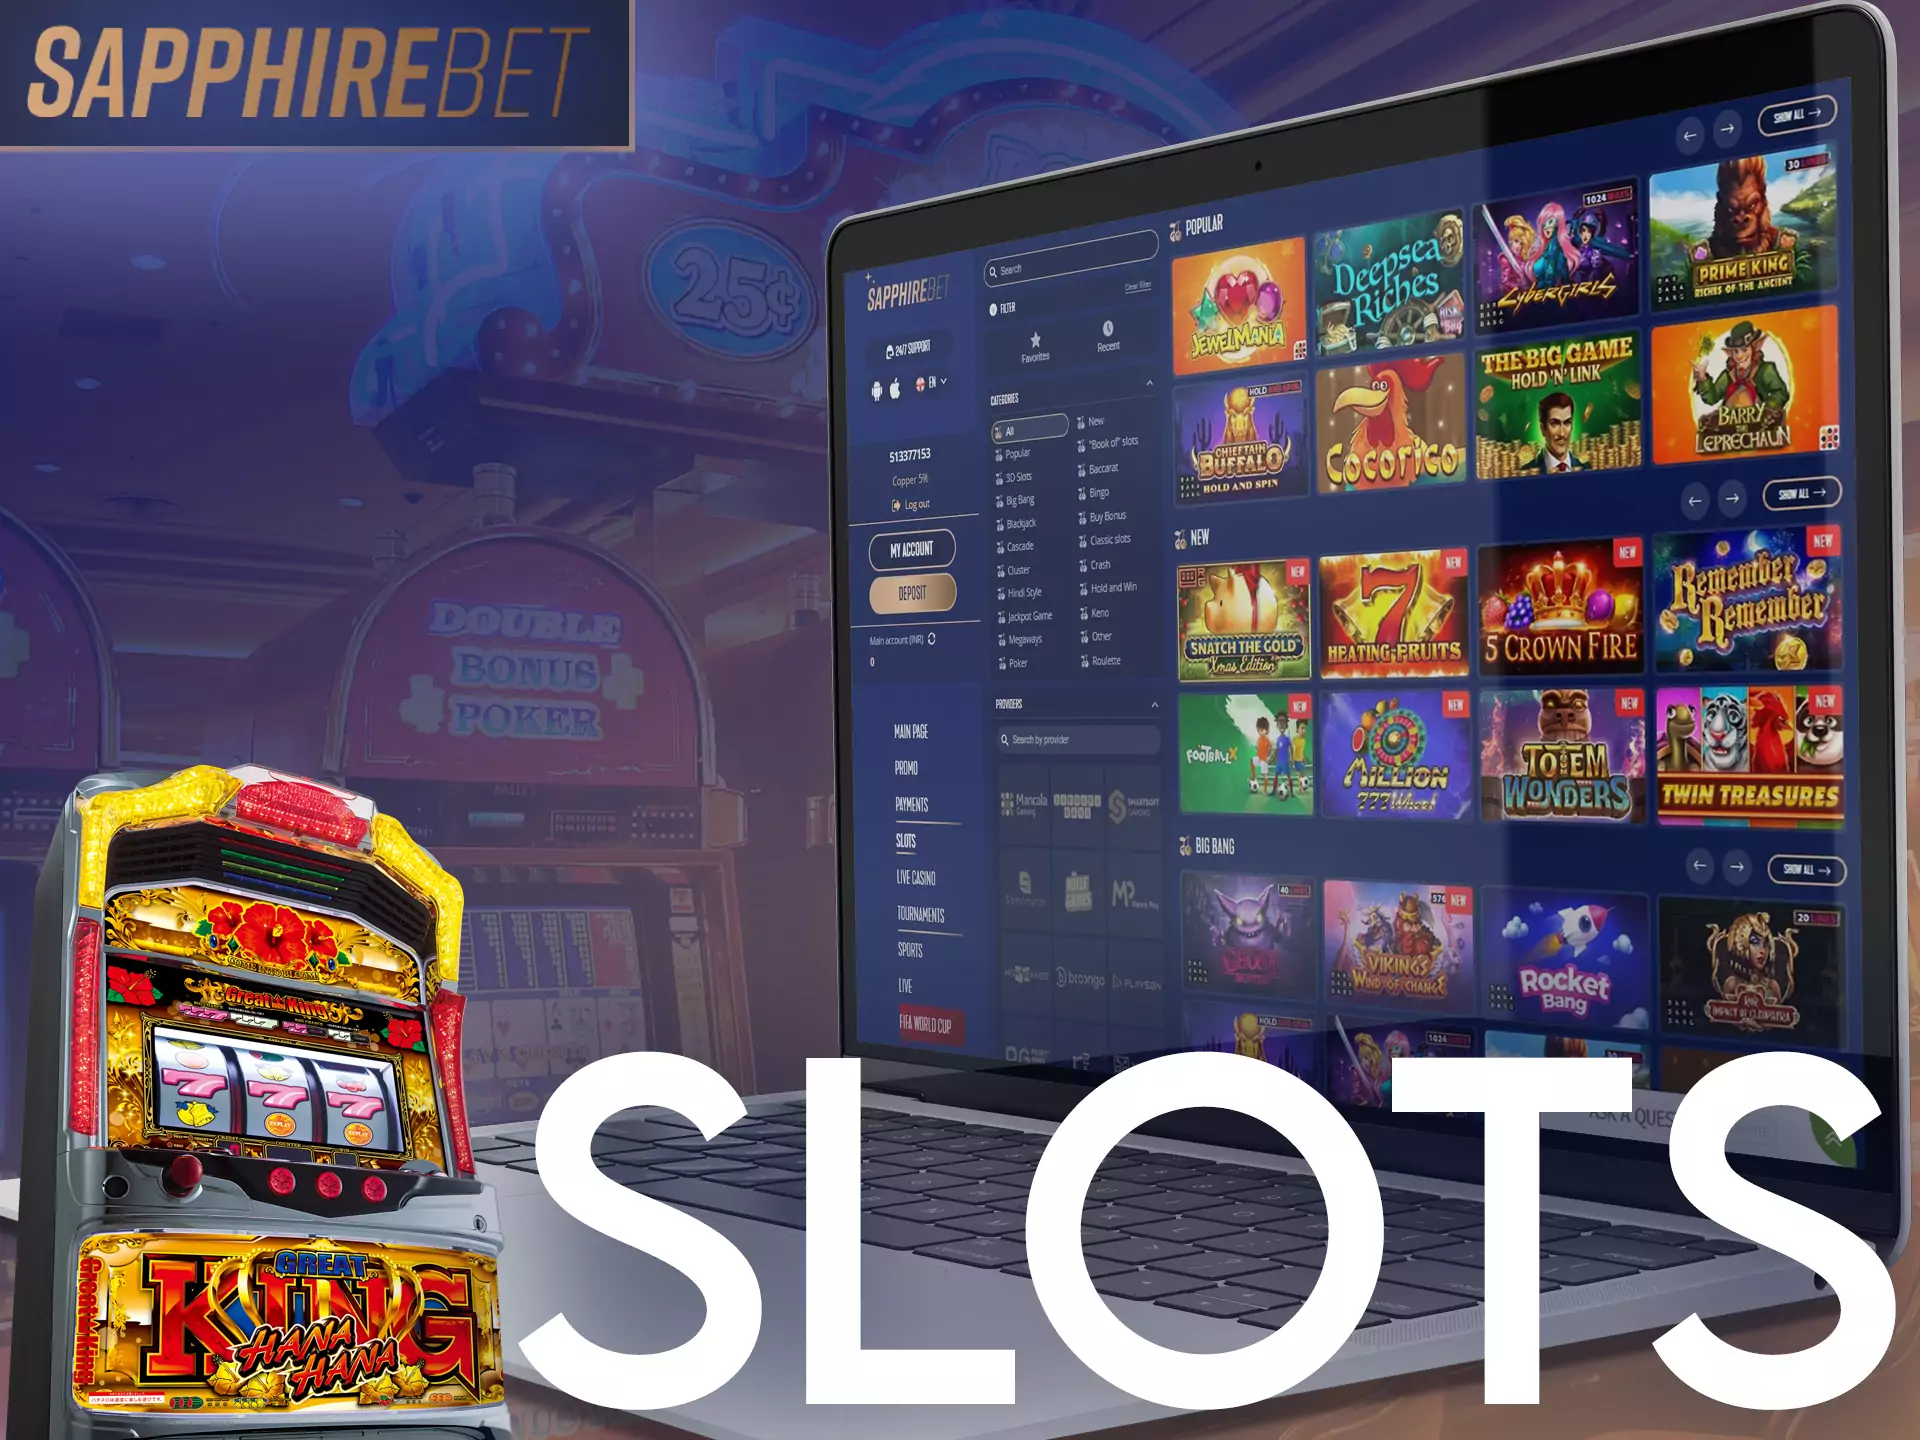 Try your luck on slots at Sapphirebet Casino.